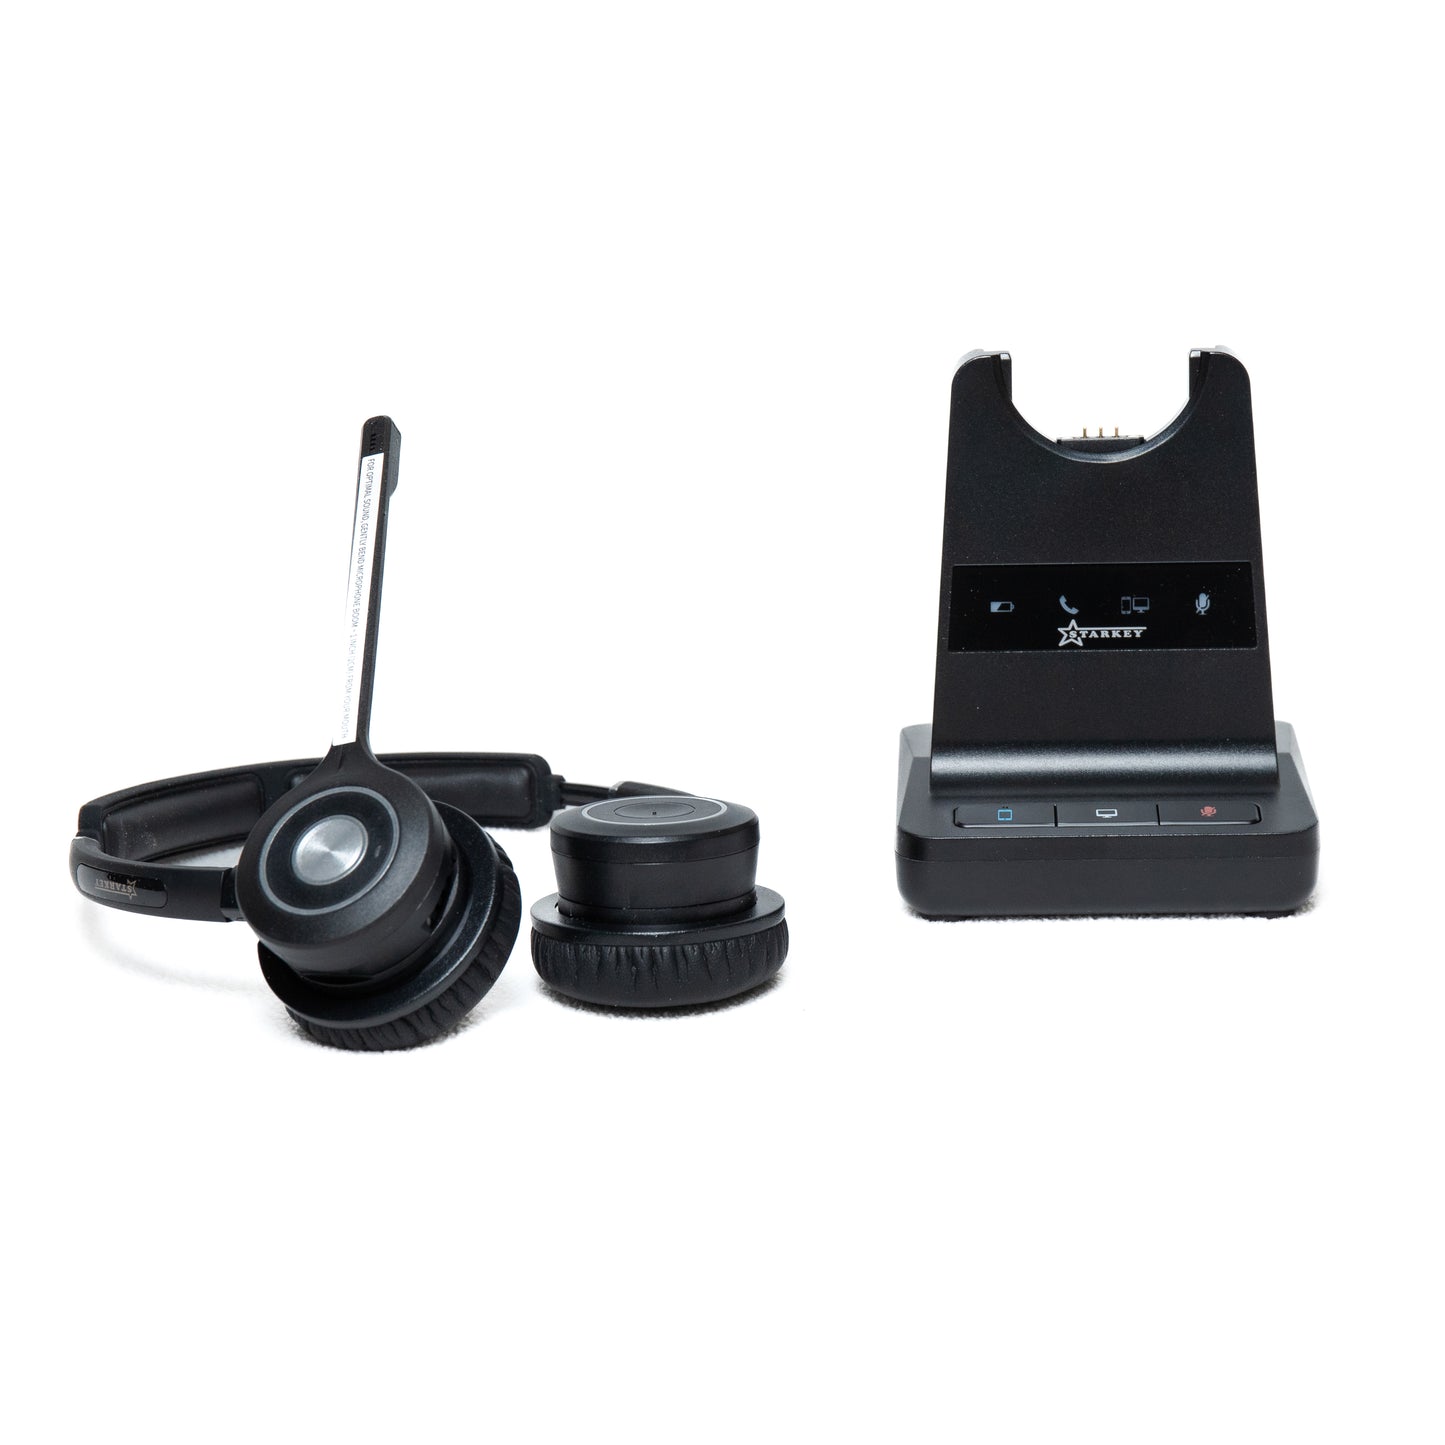 Starkey S250-Duo Binaural DECT Wireless Headset with Passive Noise Canceling Mic